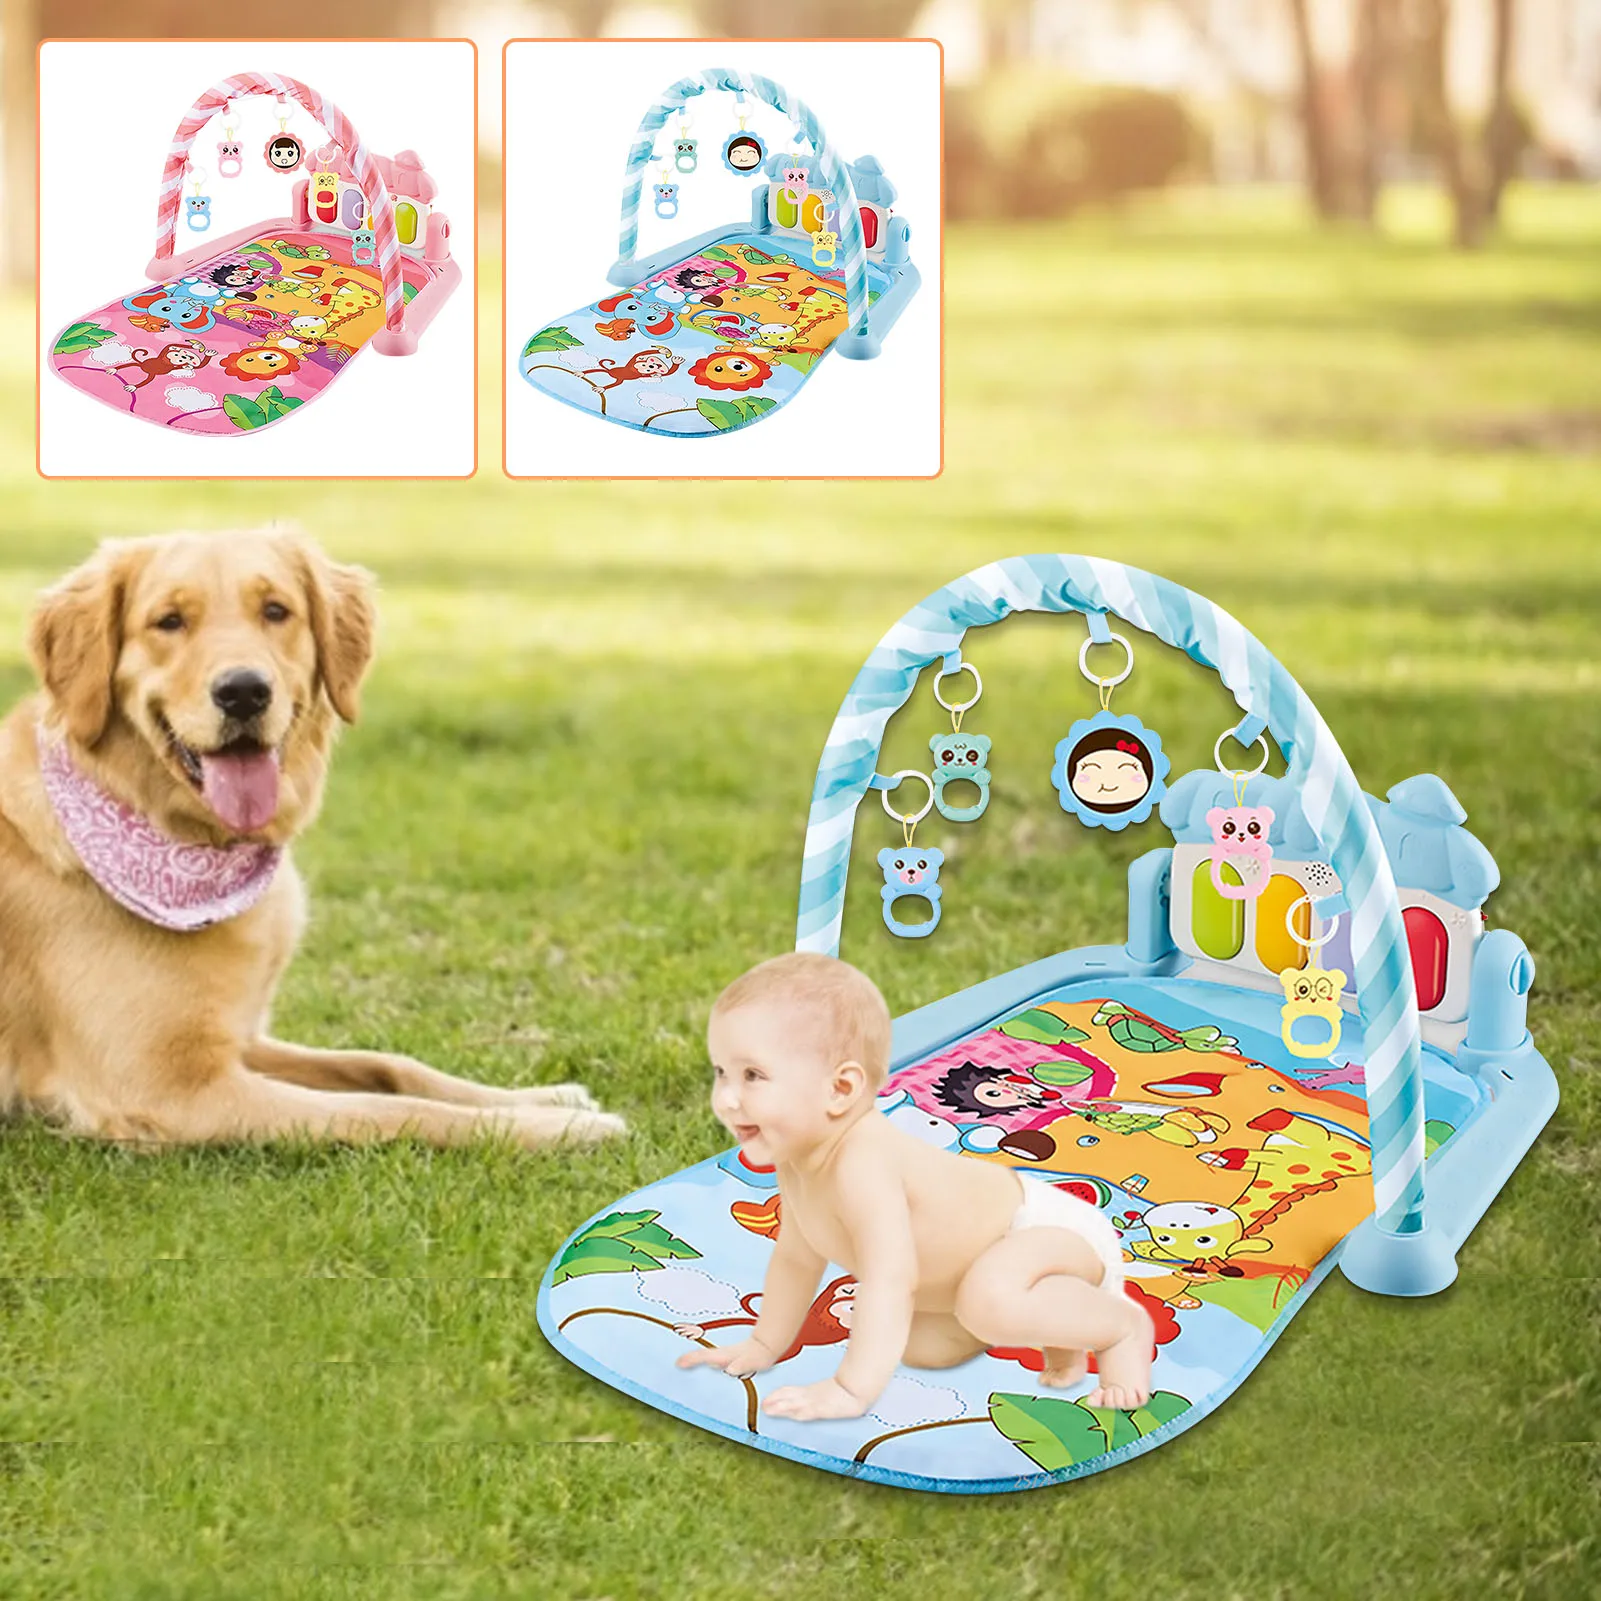 

Baby Play Mat Educational Puzzle Carpet With Piano Keyboard Lullaby Music Kids Gym Crawling Activity Rug Toys for 0-12 Months